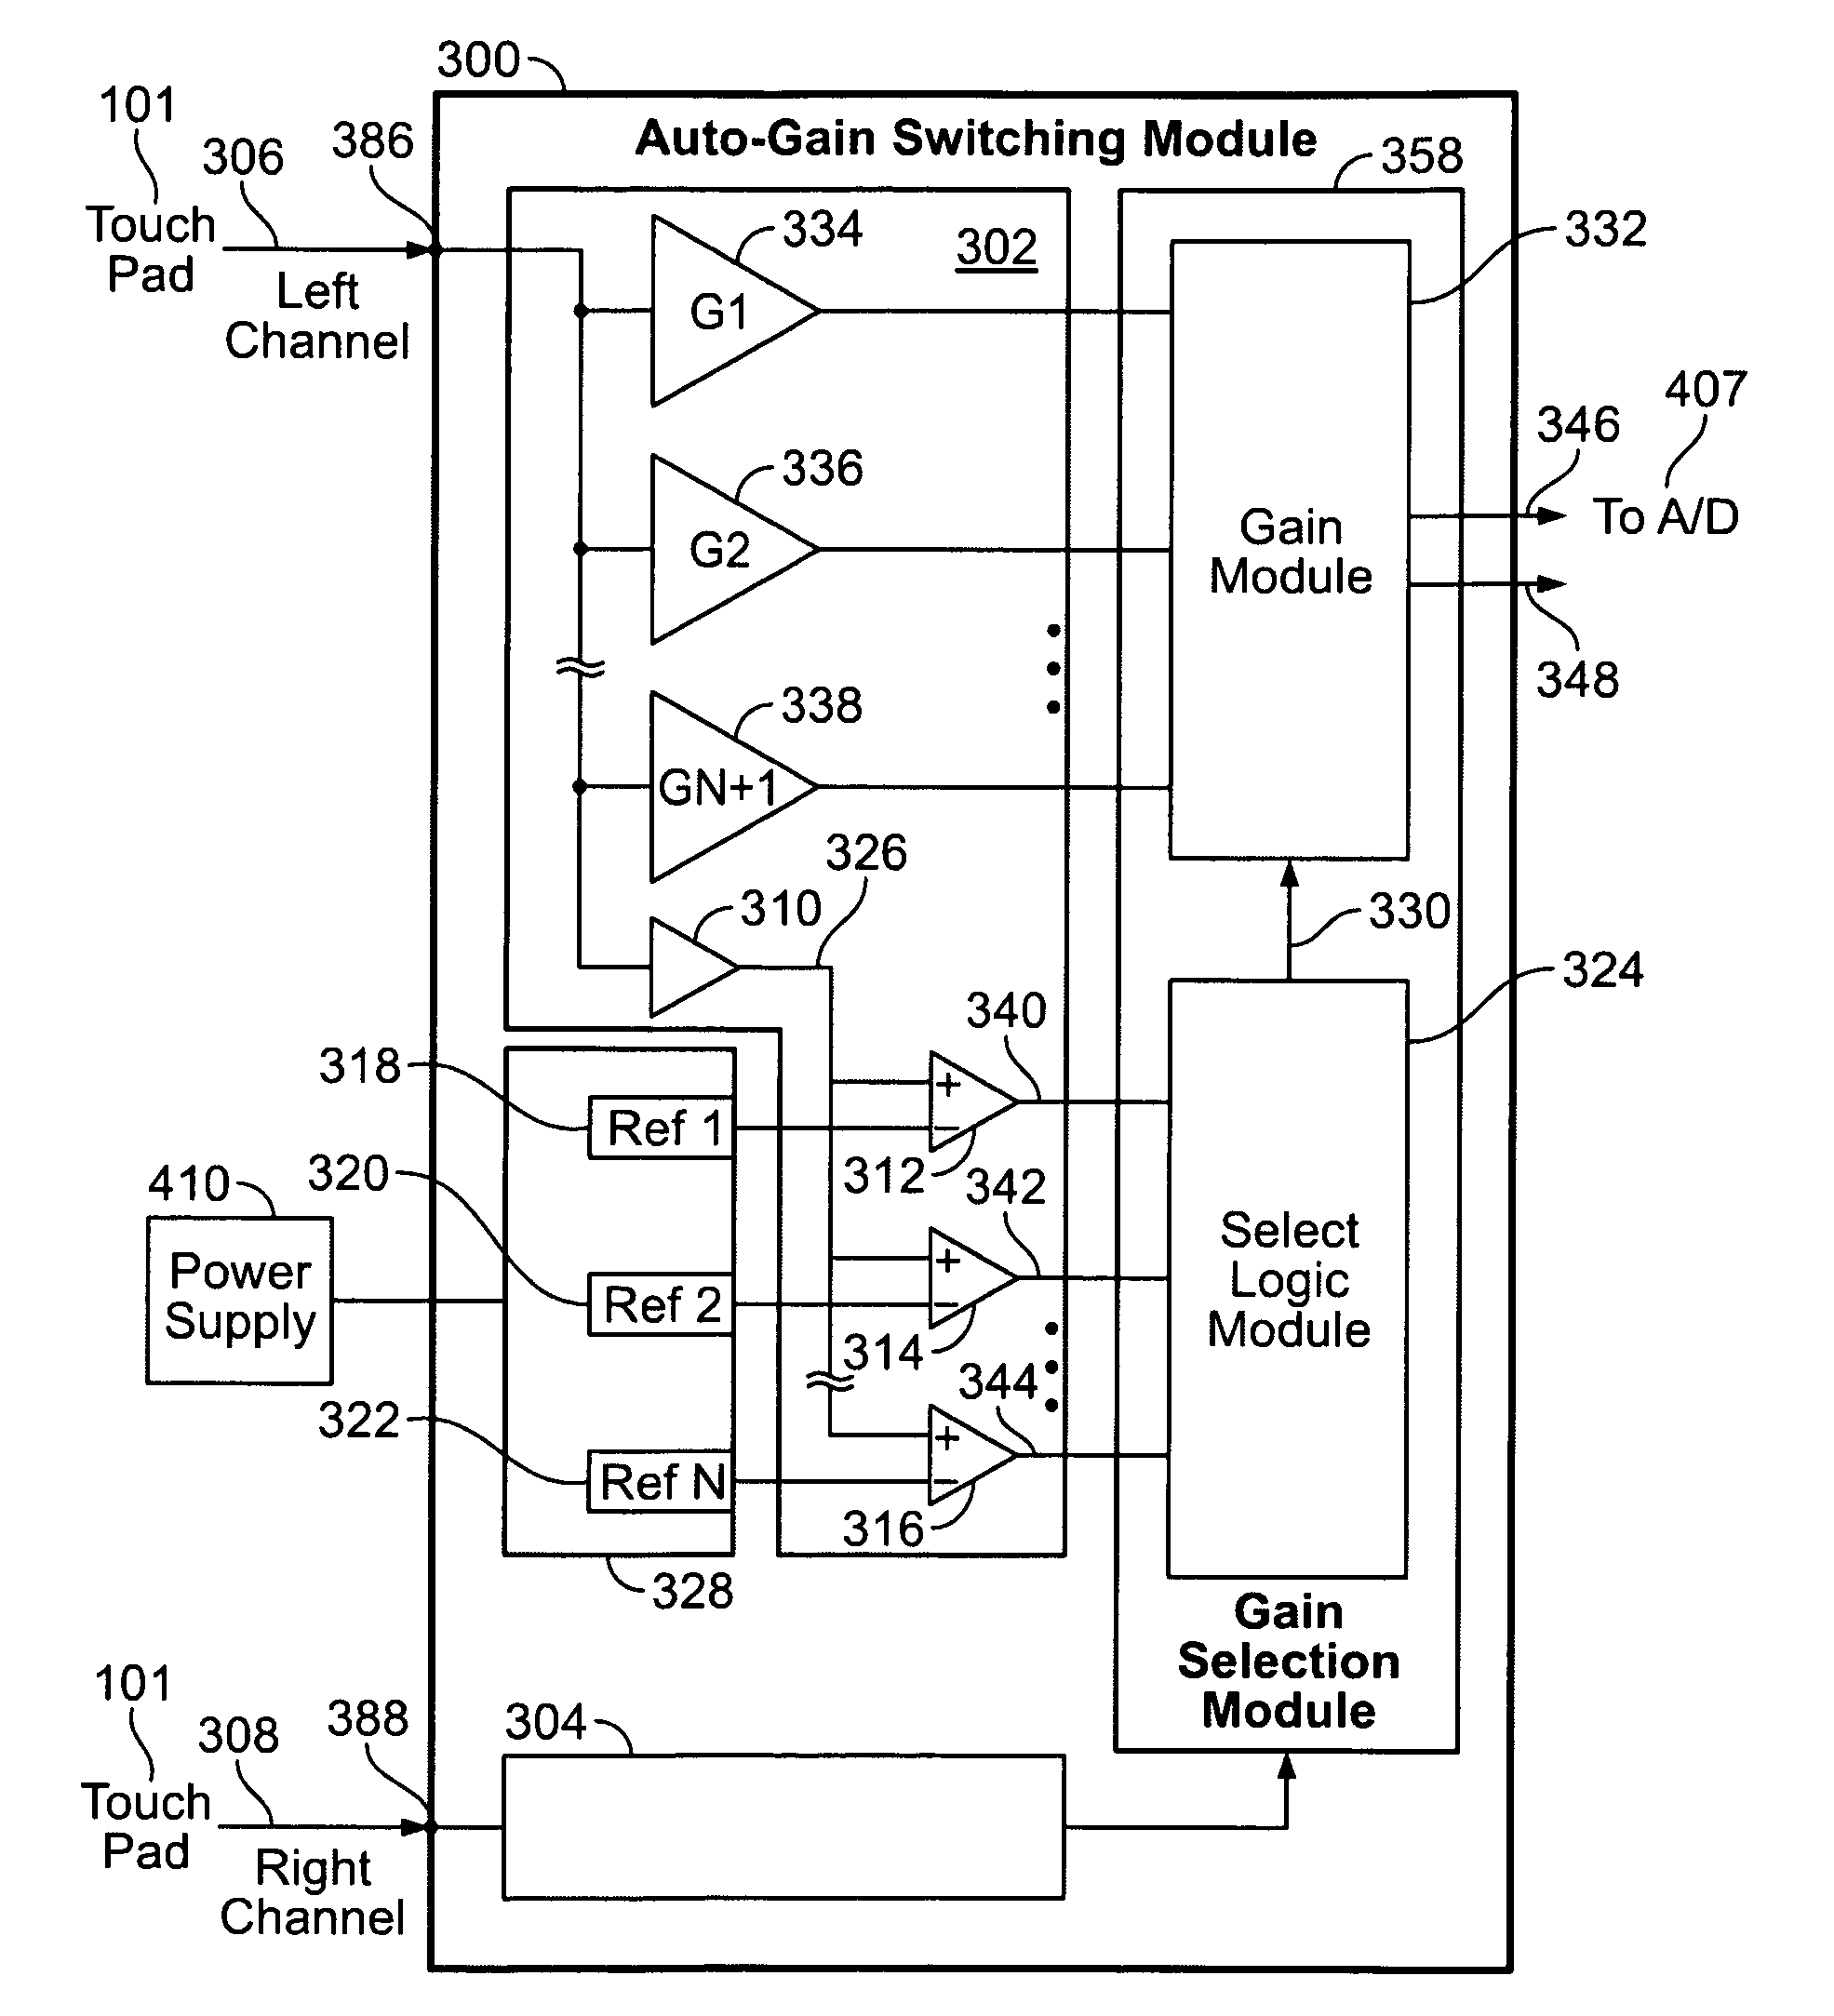 Auto-gain switching module for acoustic touch systems